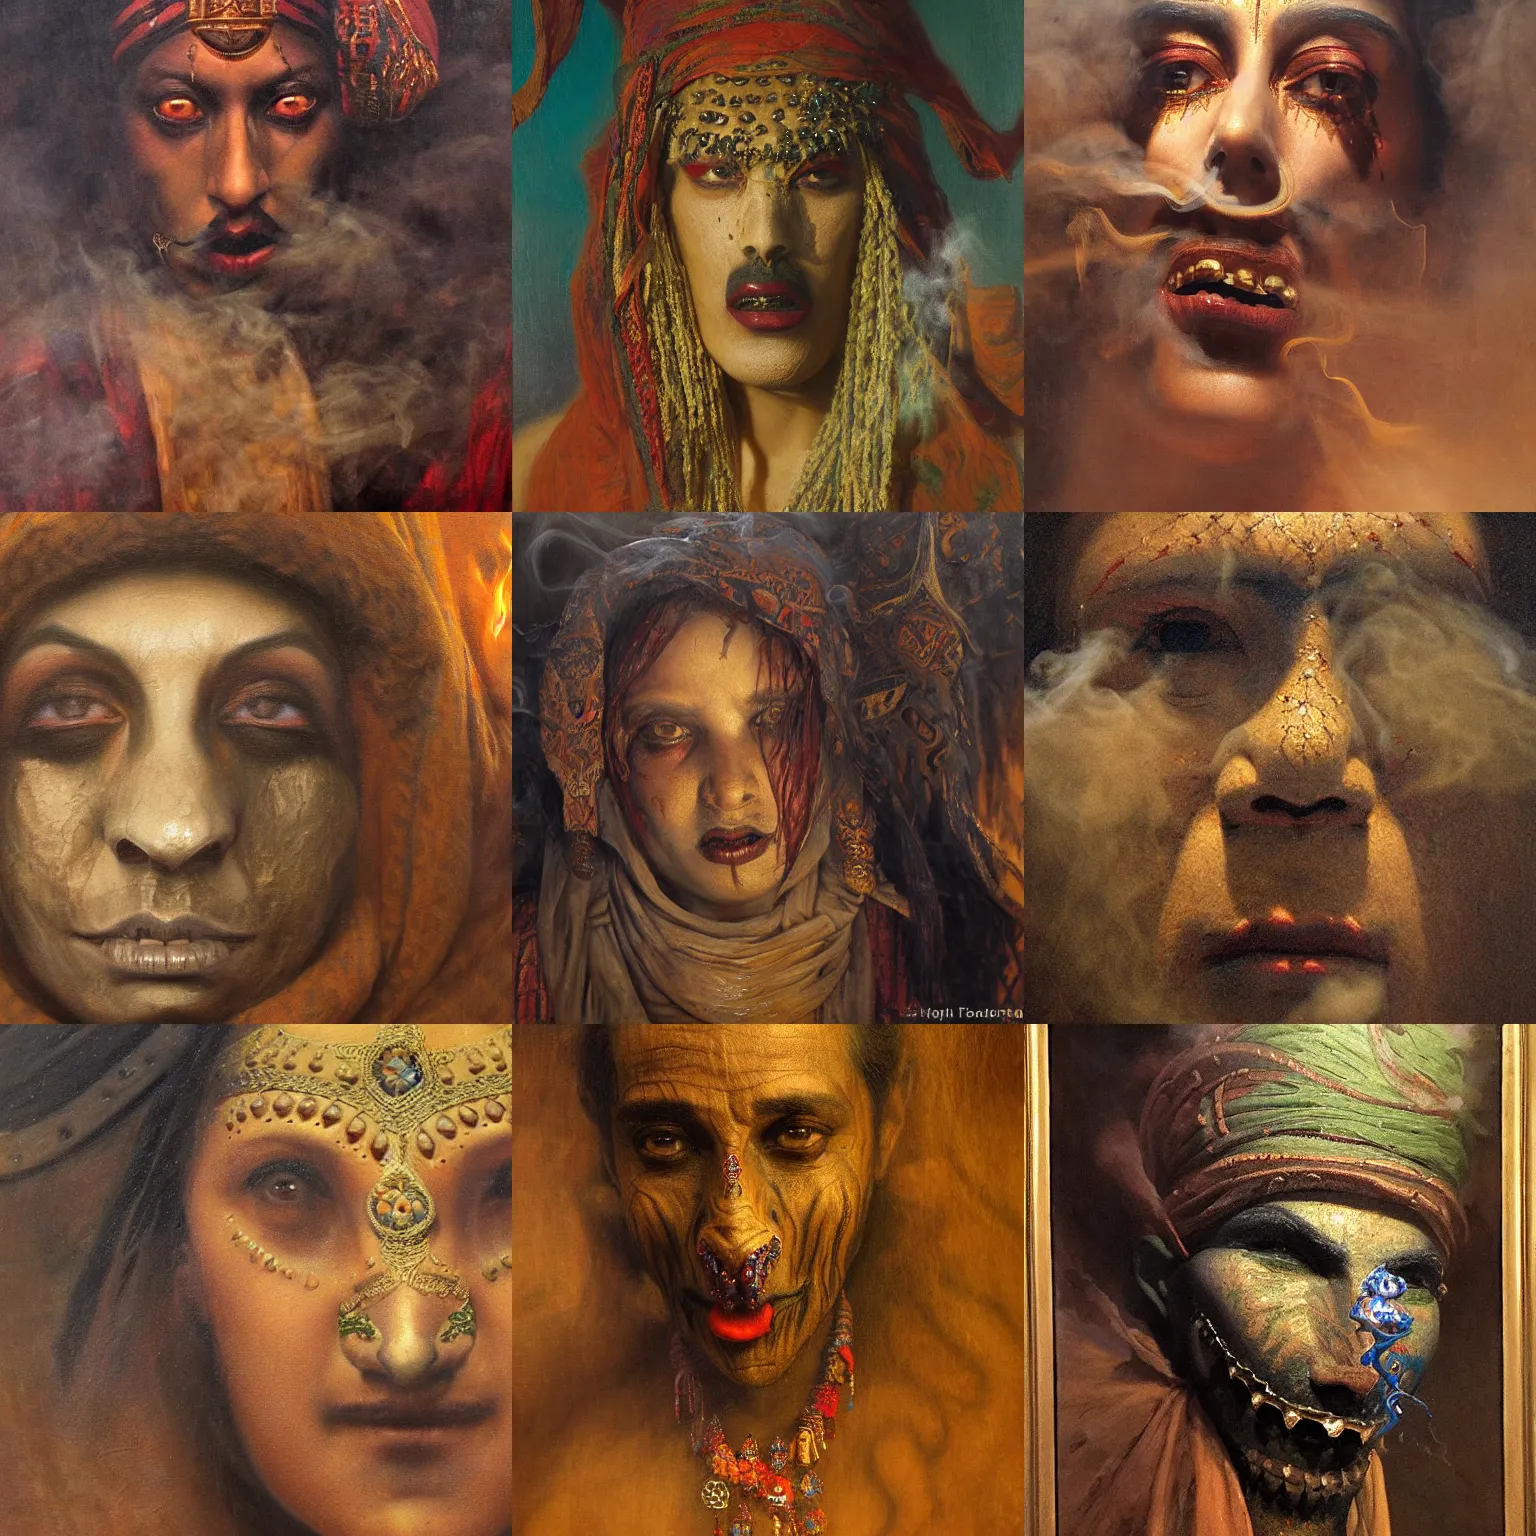 Prompt: orientalism terrifying smoke djinni face detail edwin longsden long and theodore ralli and nasreddine dinet and adam styka, masterful intricate artwork. oil on canvas, excellent lighting, high detail 8 k